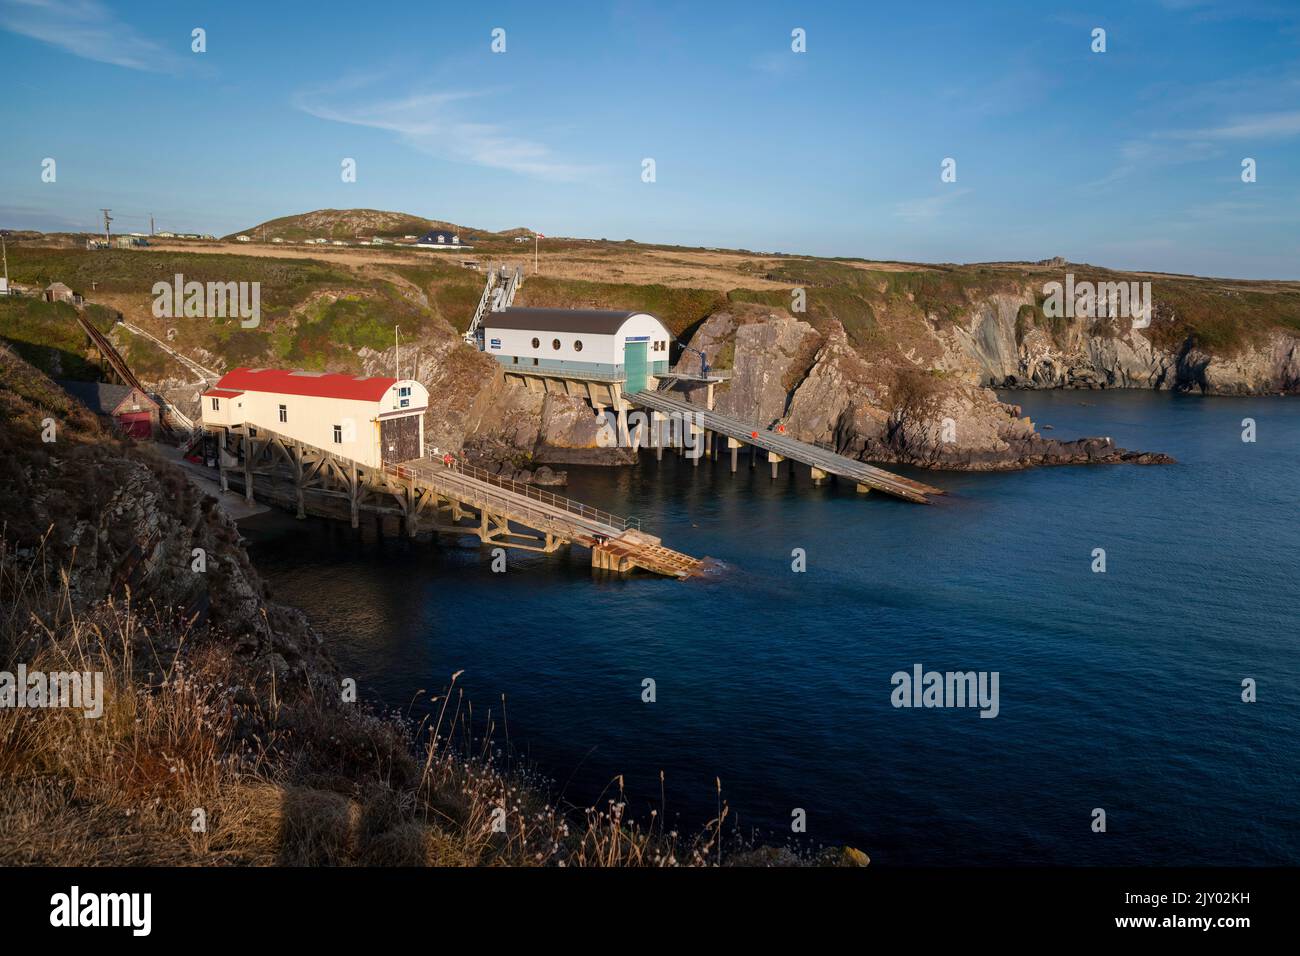 Editorial St Justinians, UK - August 30, 2022: St Davids Lifeboat Station in Pembrokeshire, West Wales, operates both an all-weather and an inshore li Stock Photo